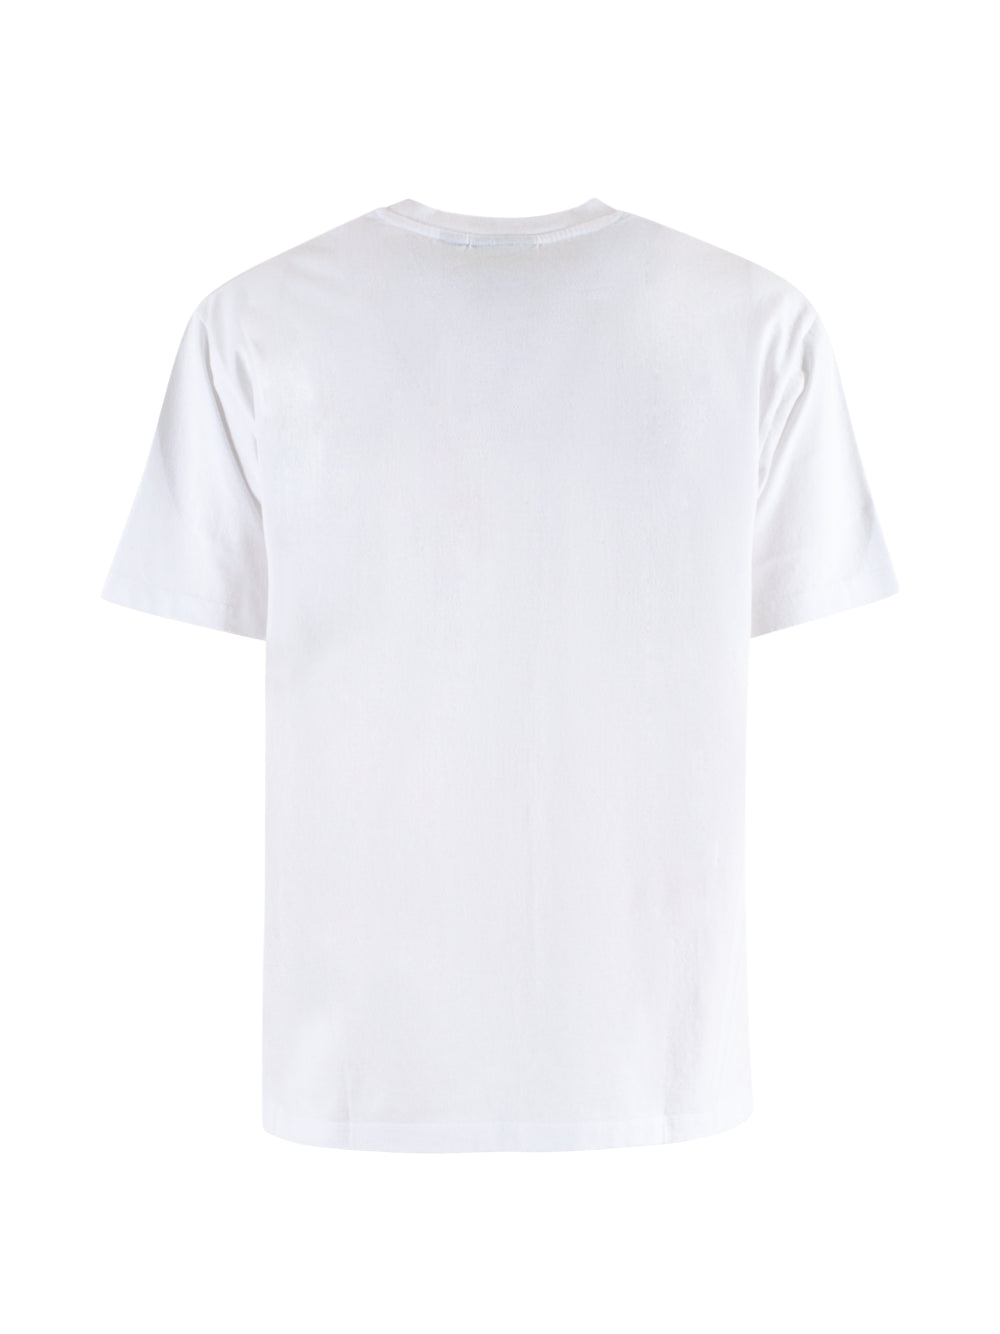 Beached and Blank T-Shirt